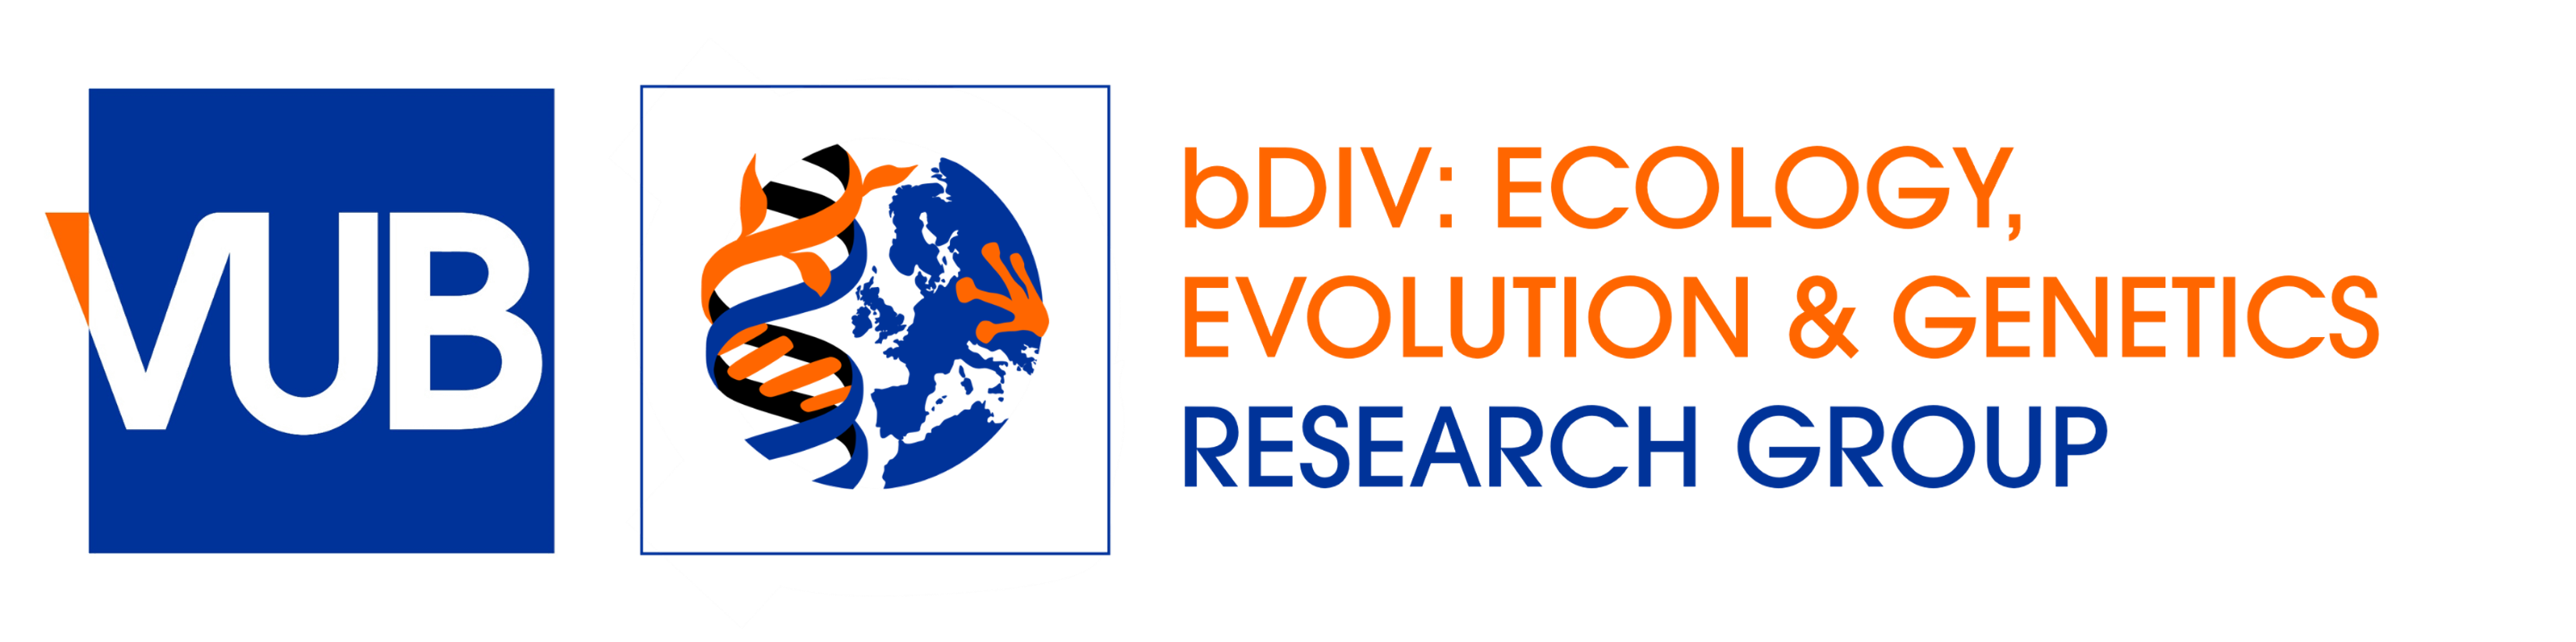 bDIV home page